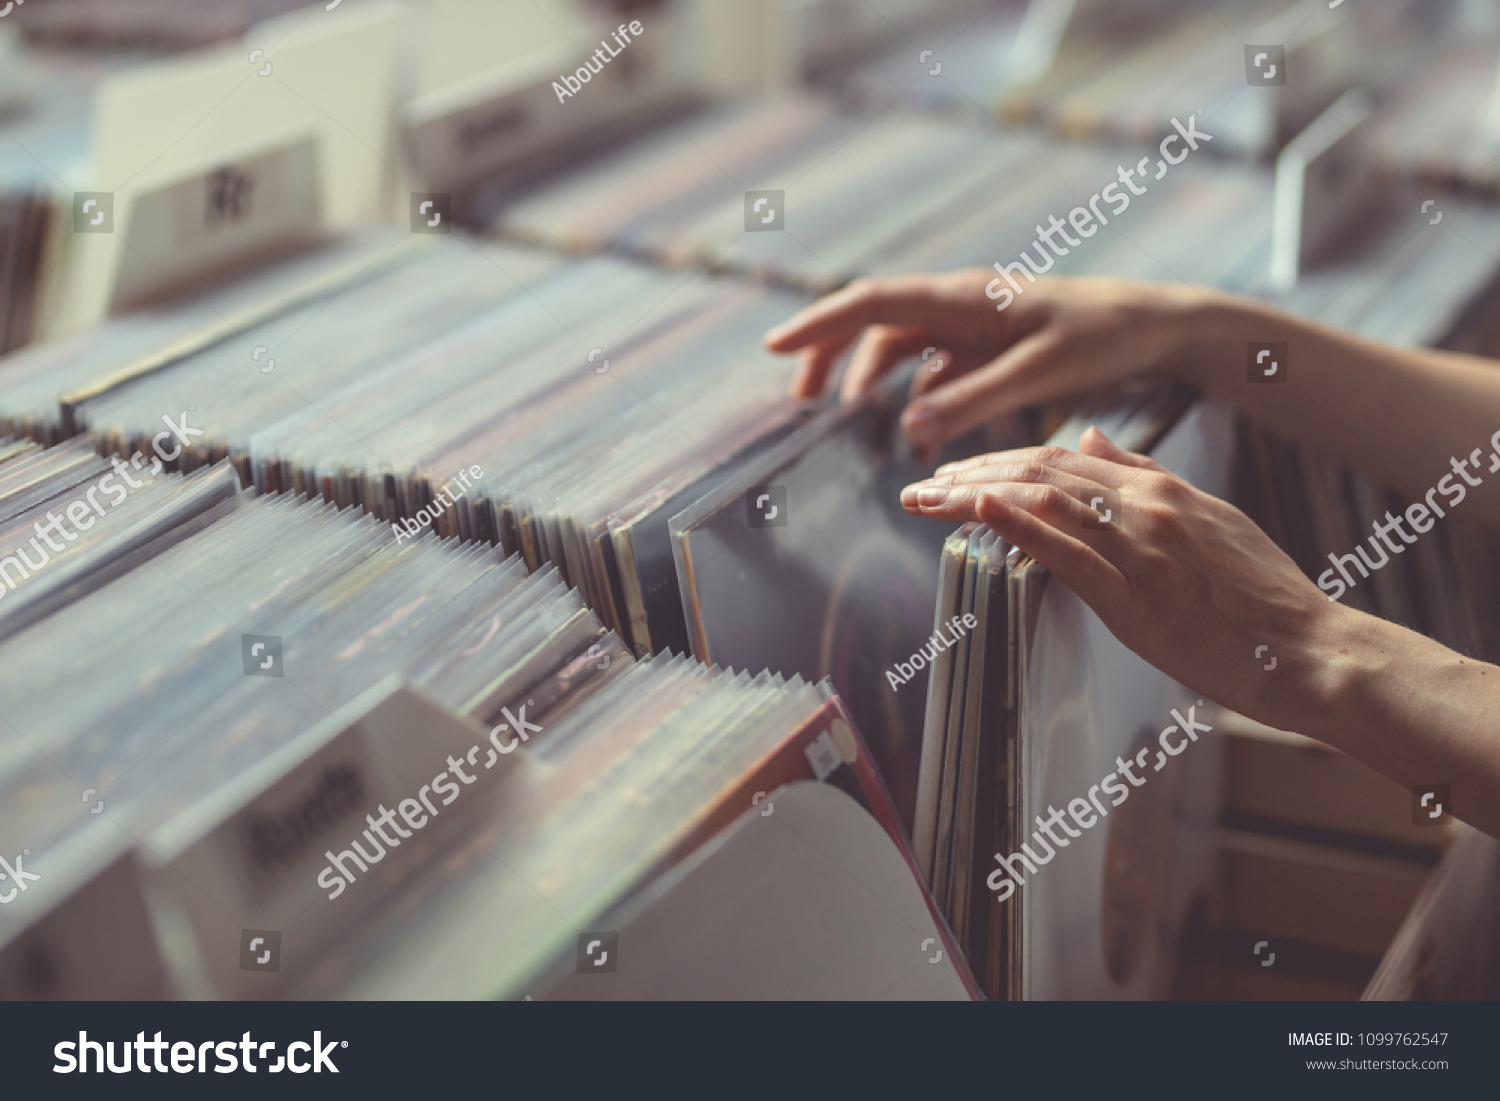 Women's hands browsing records in a vinyl record store #1099762547